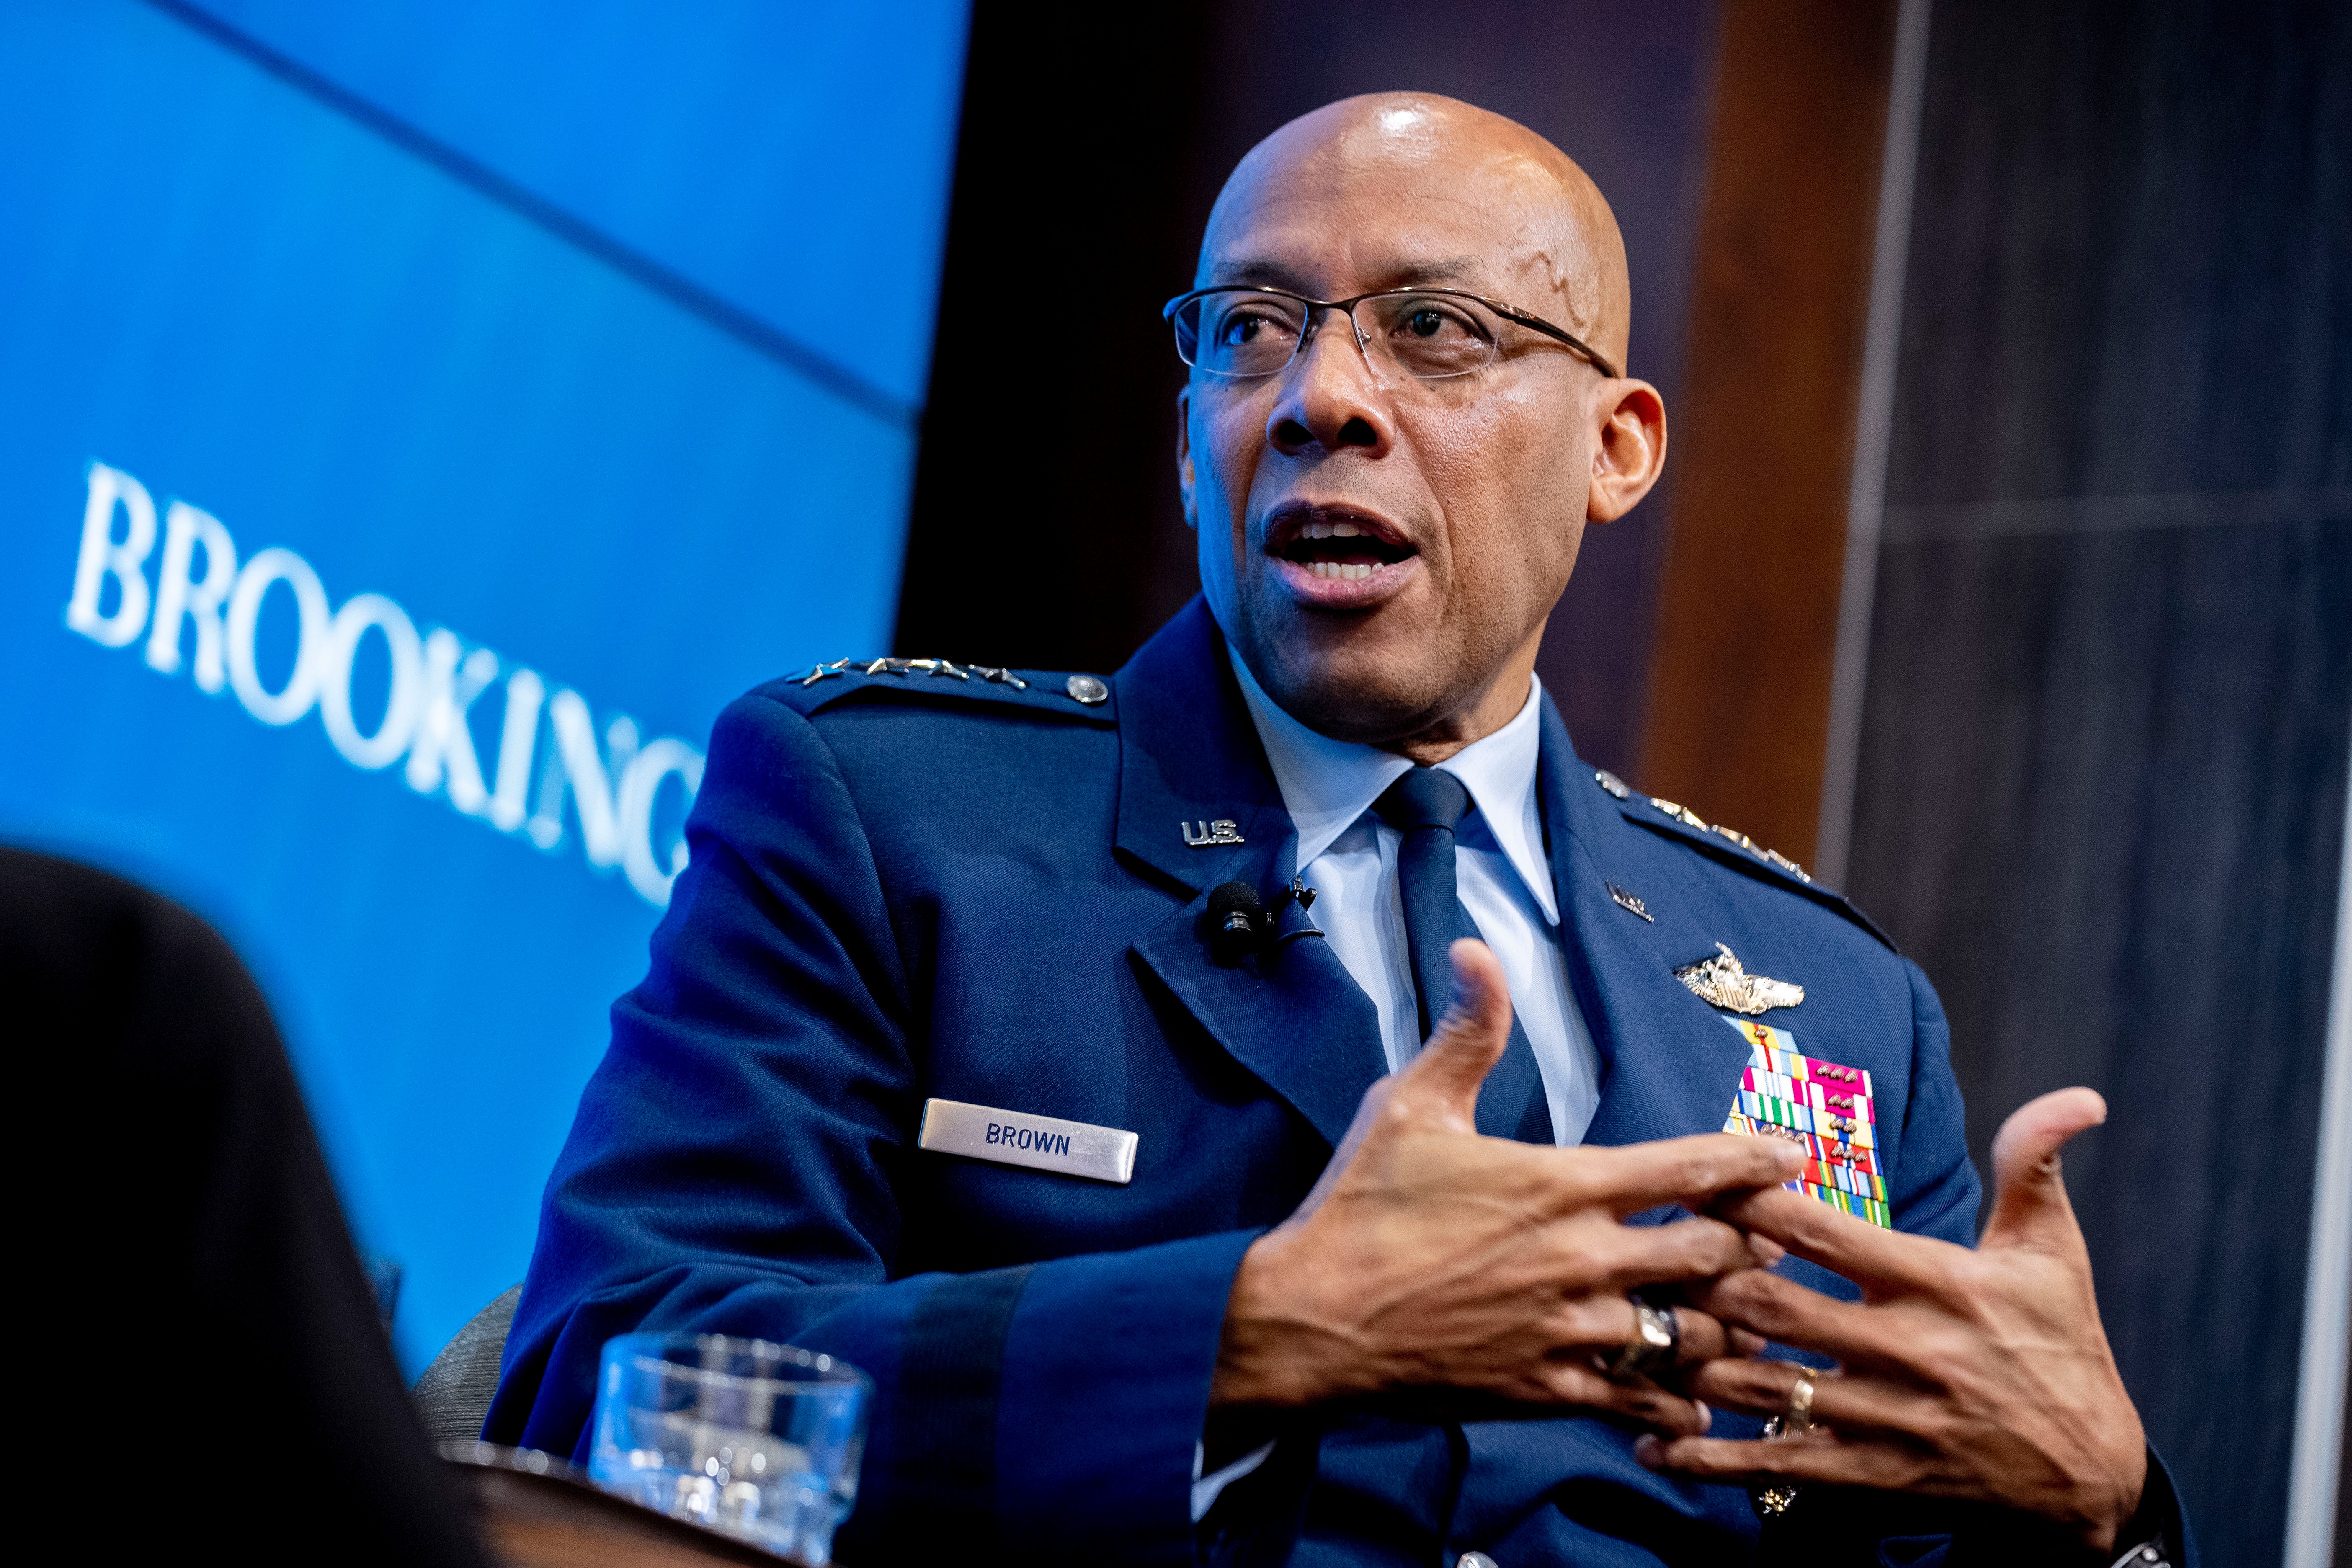 Air Force Chief of Staff Gen CQ Brown, Jr. speaks about U.S. defense strategy at the Brookings Institution in Washington in February